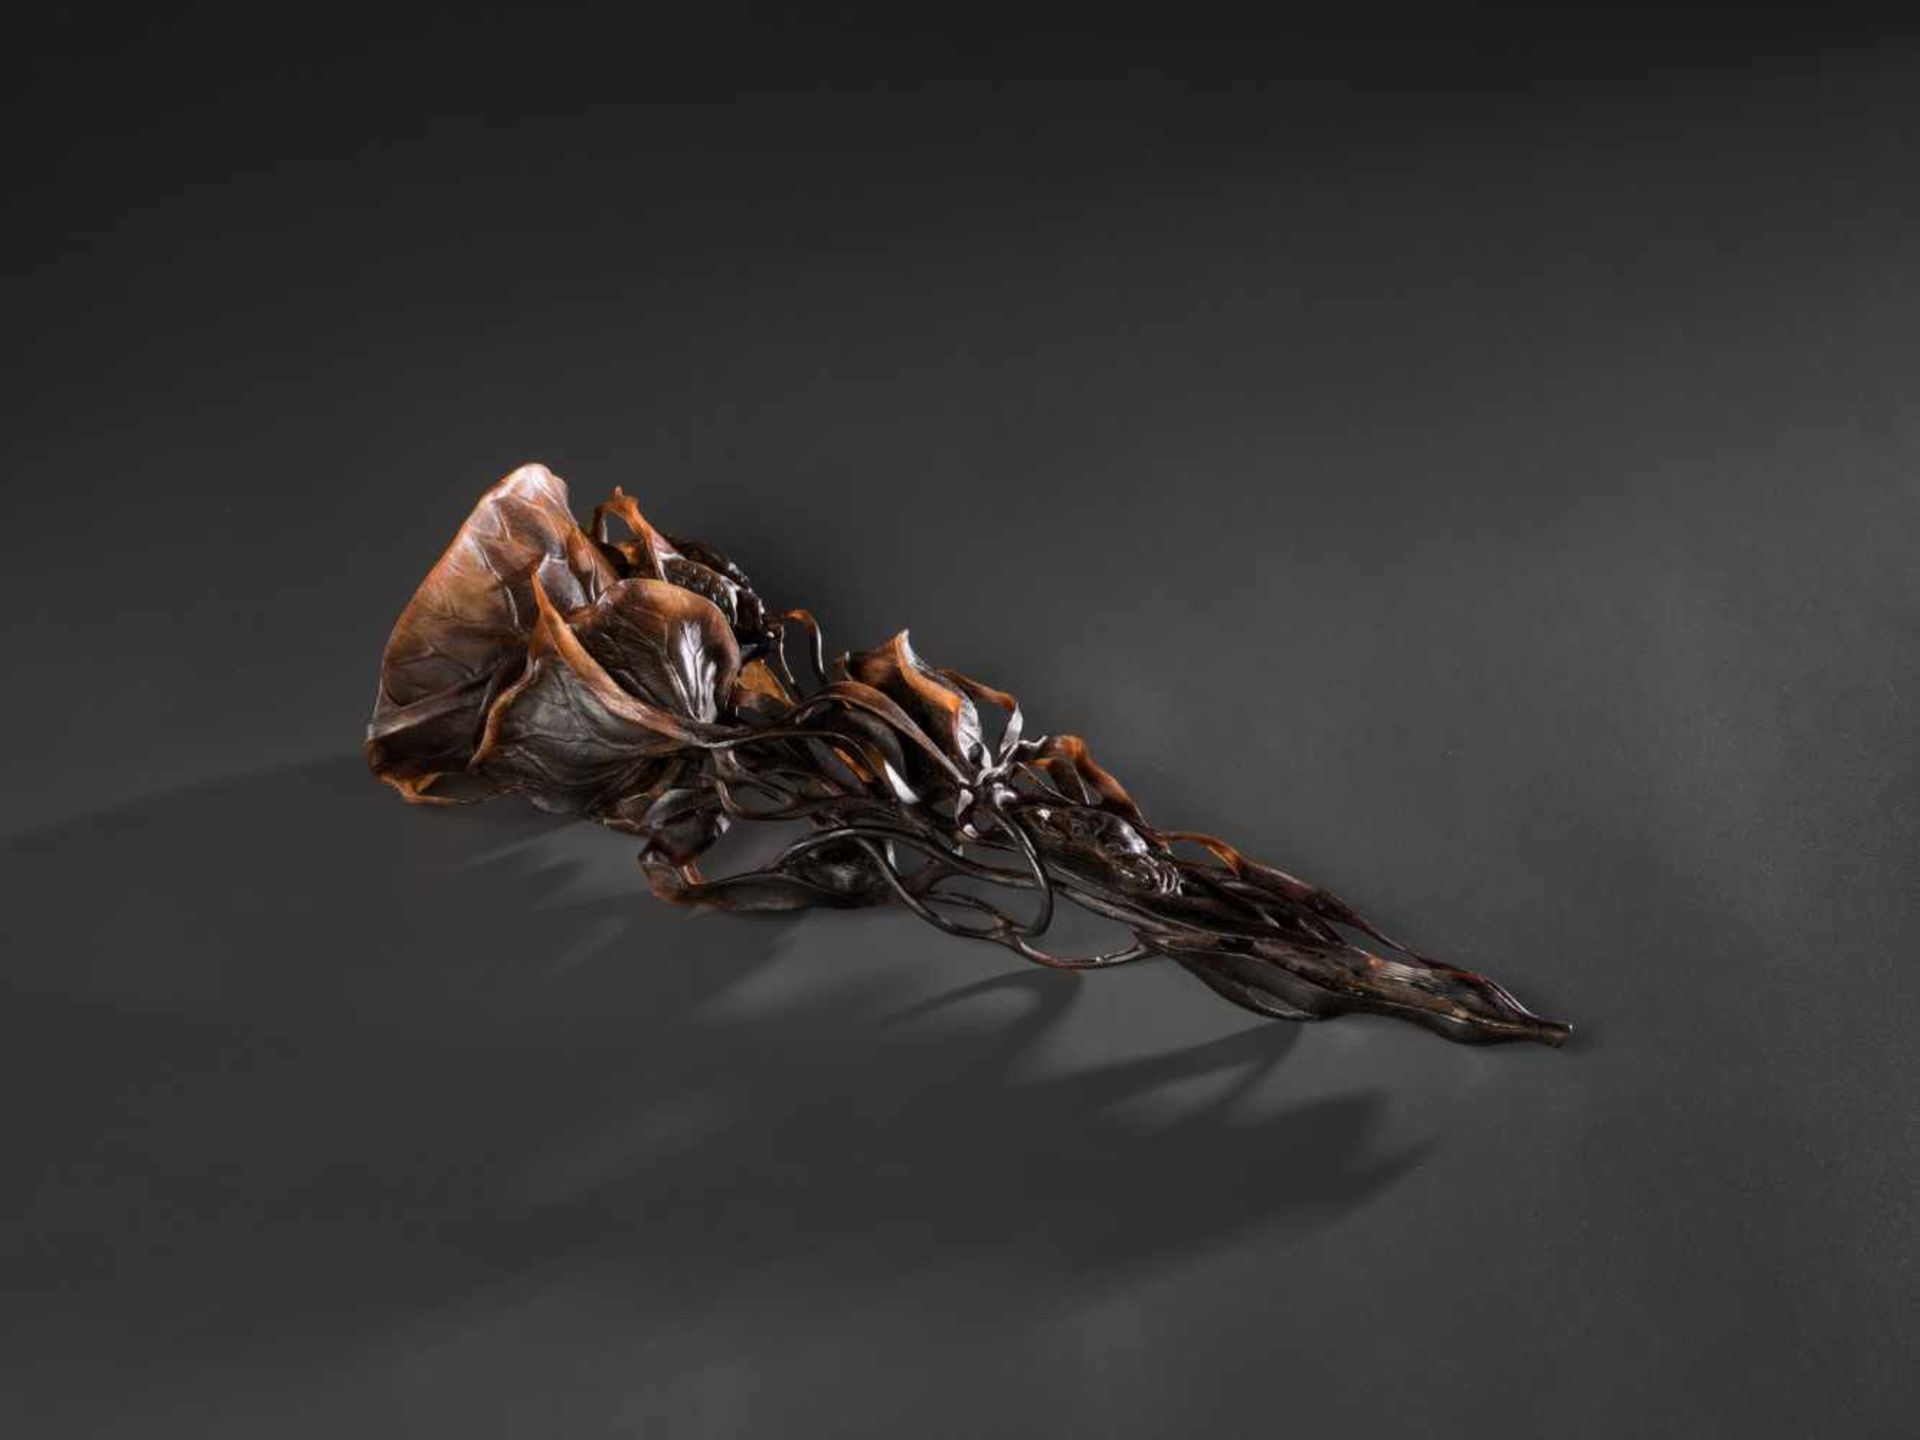 AN 18TH CENTURY RETICULATED FULL TIP RHINOCEROS ‘LOTUS’ CUP Rhinoceros horn in a deep brown to light - Bild 6 aus 9